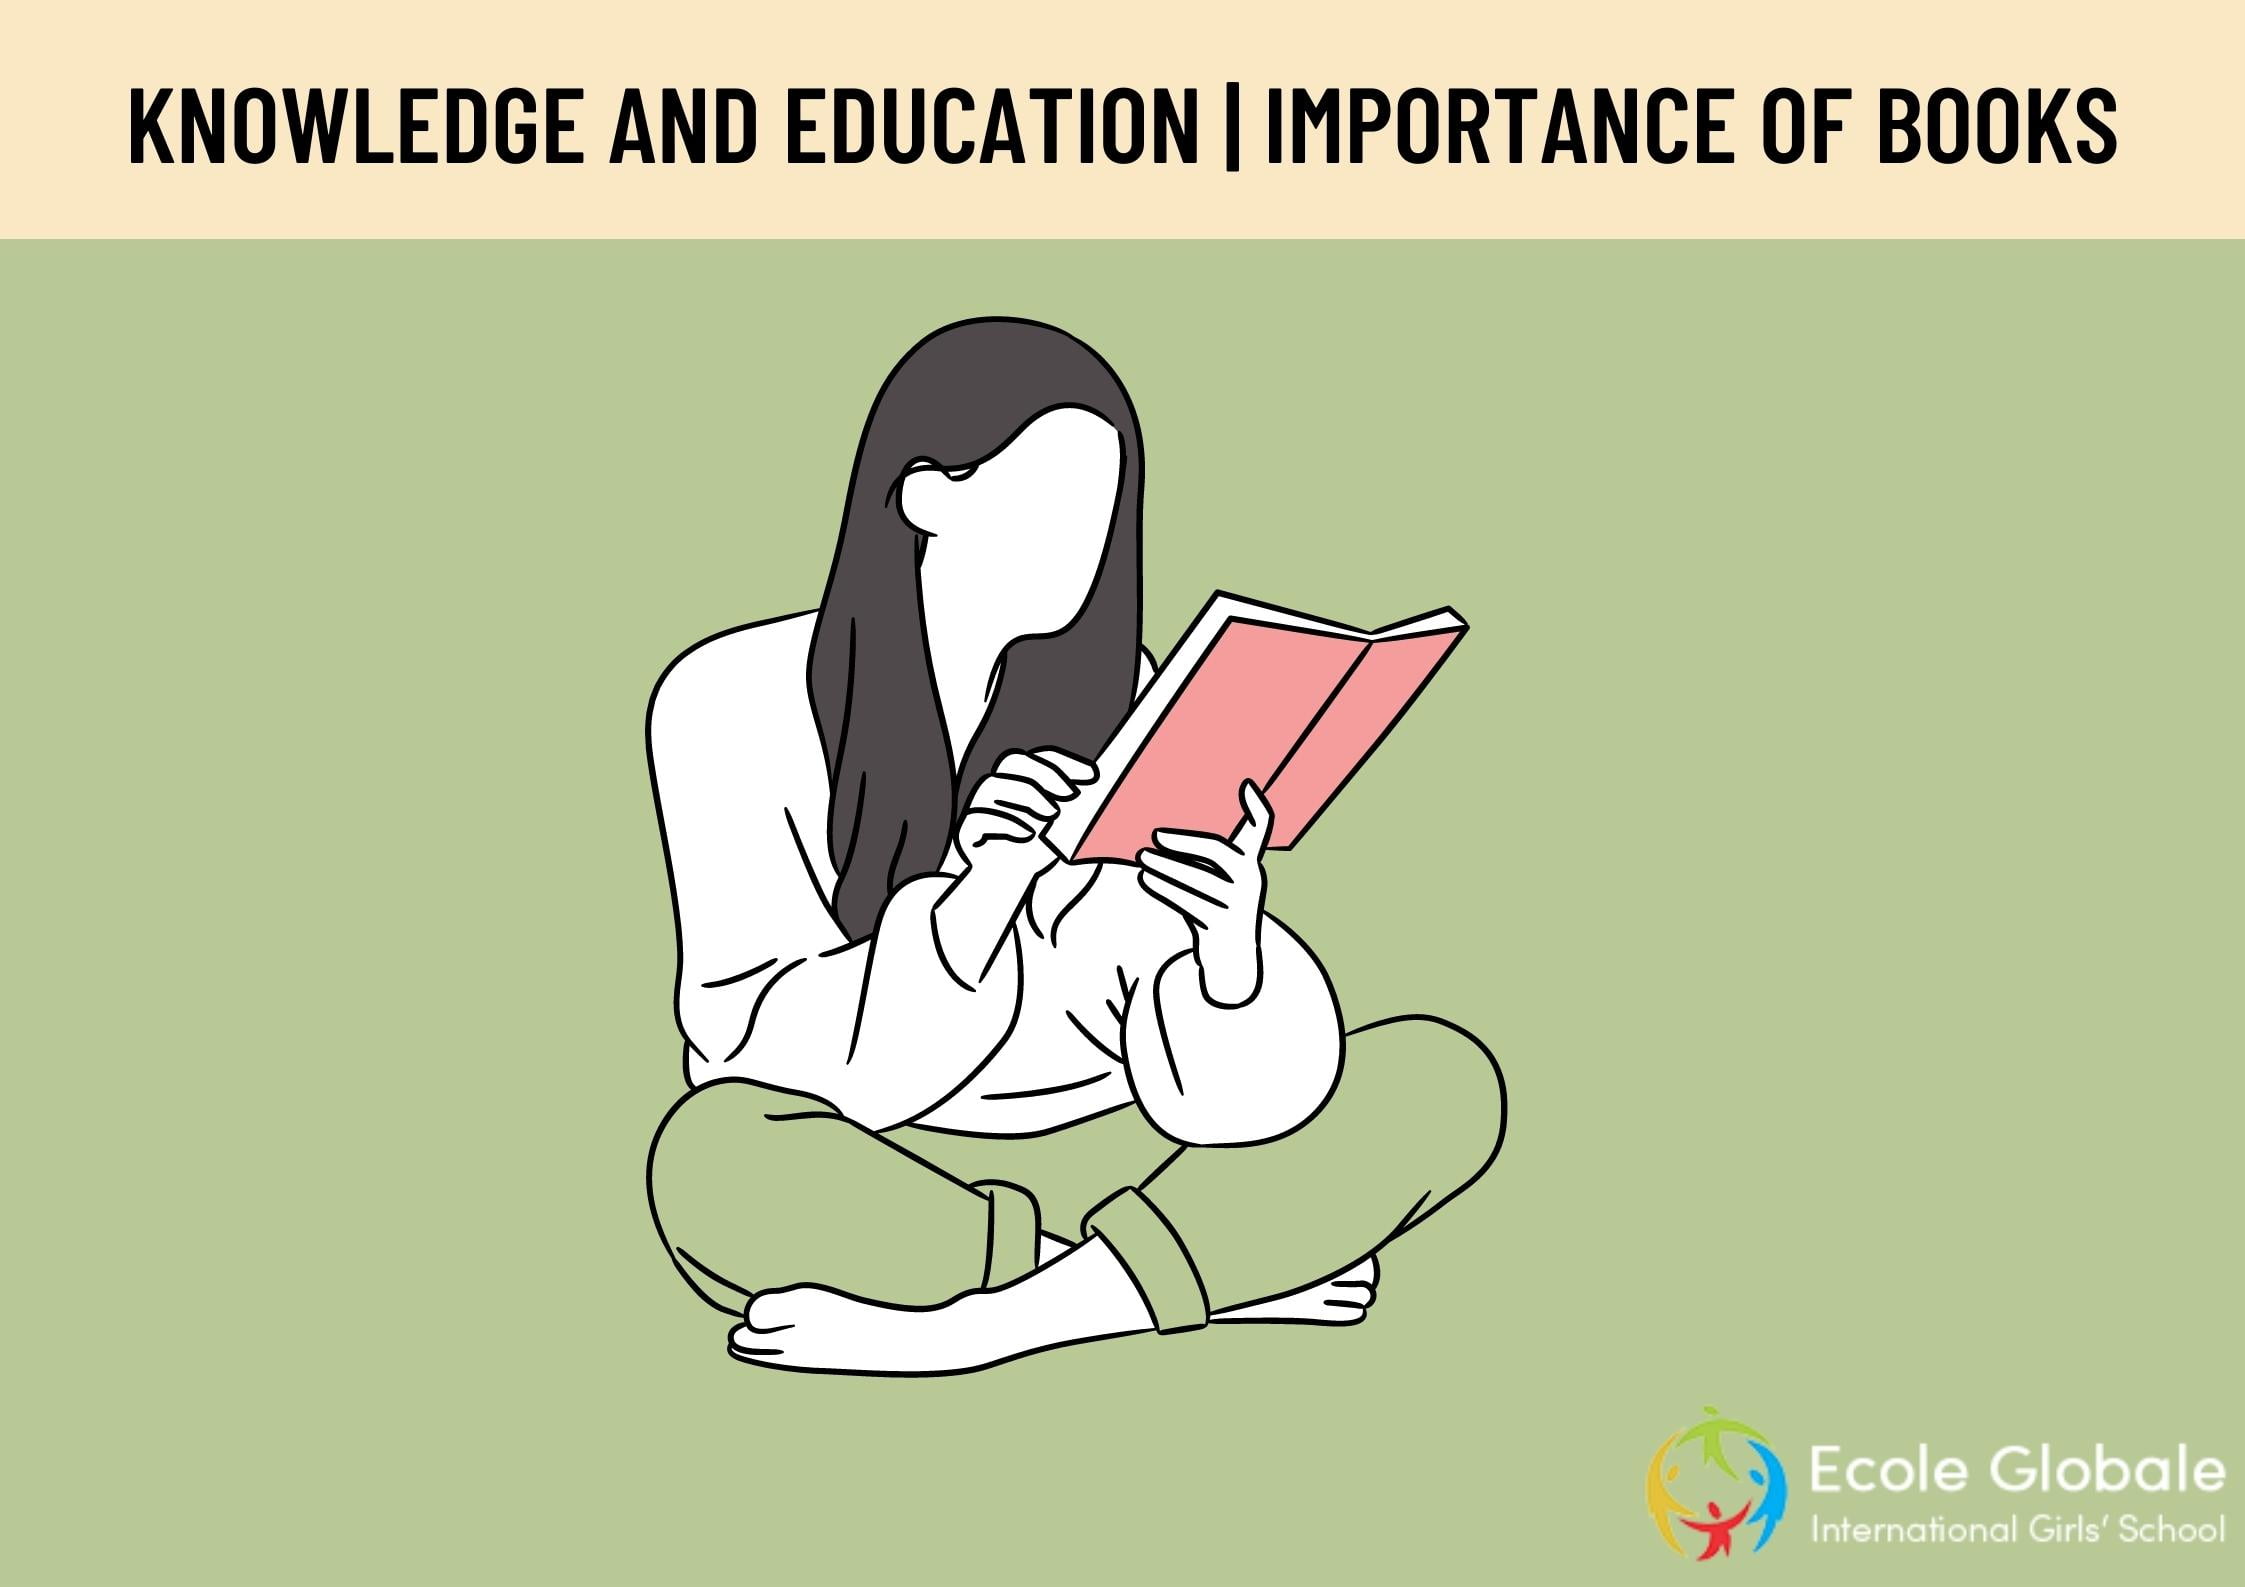 Why books are the most important tool for knowledge and education?